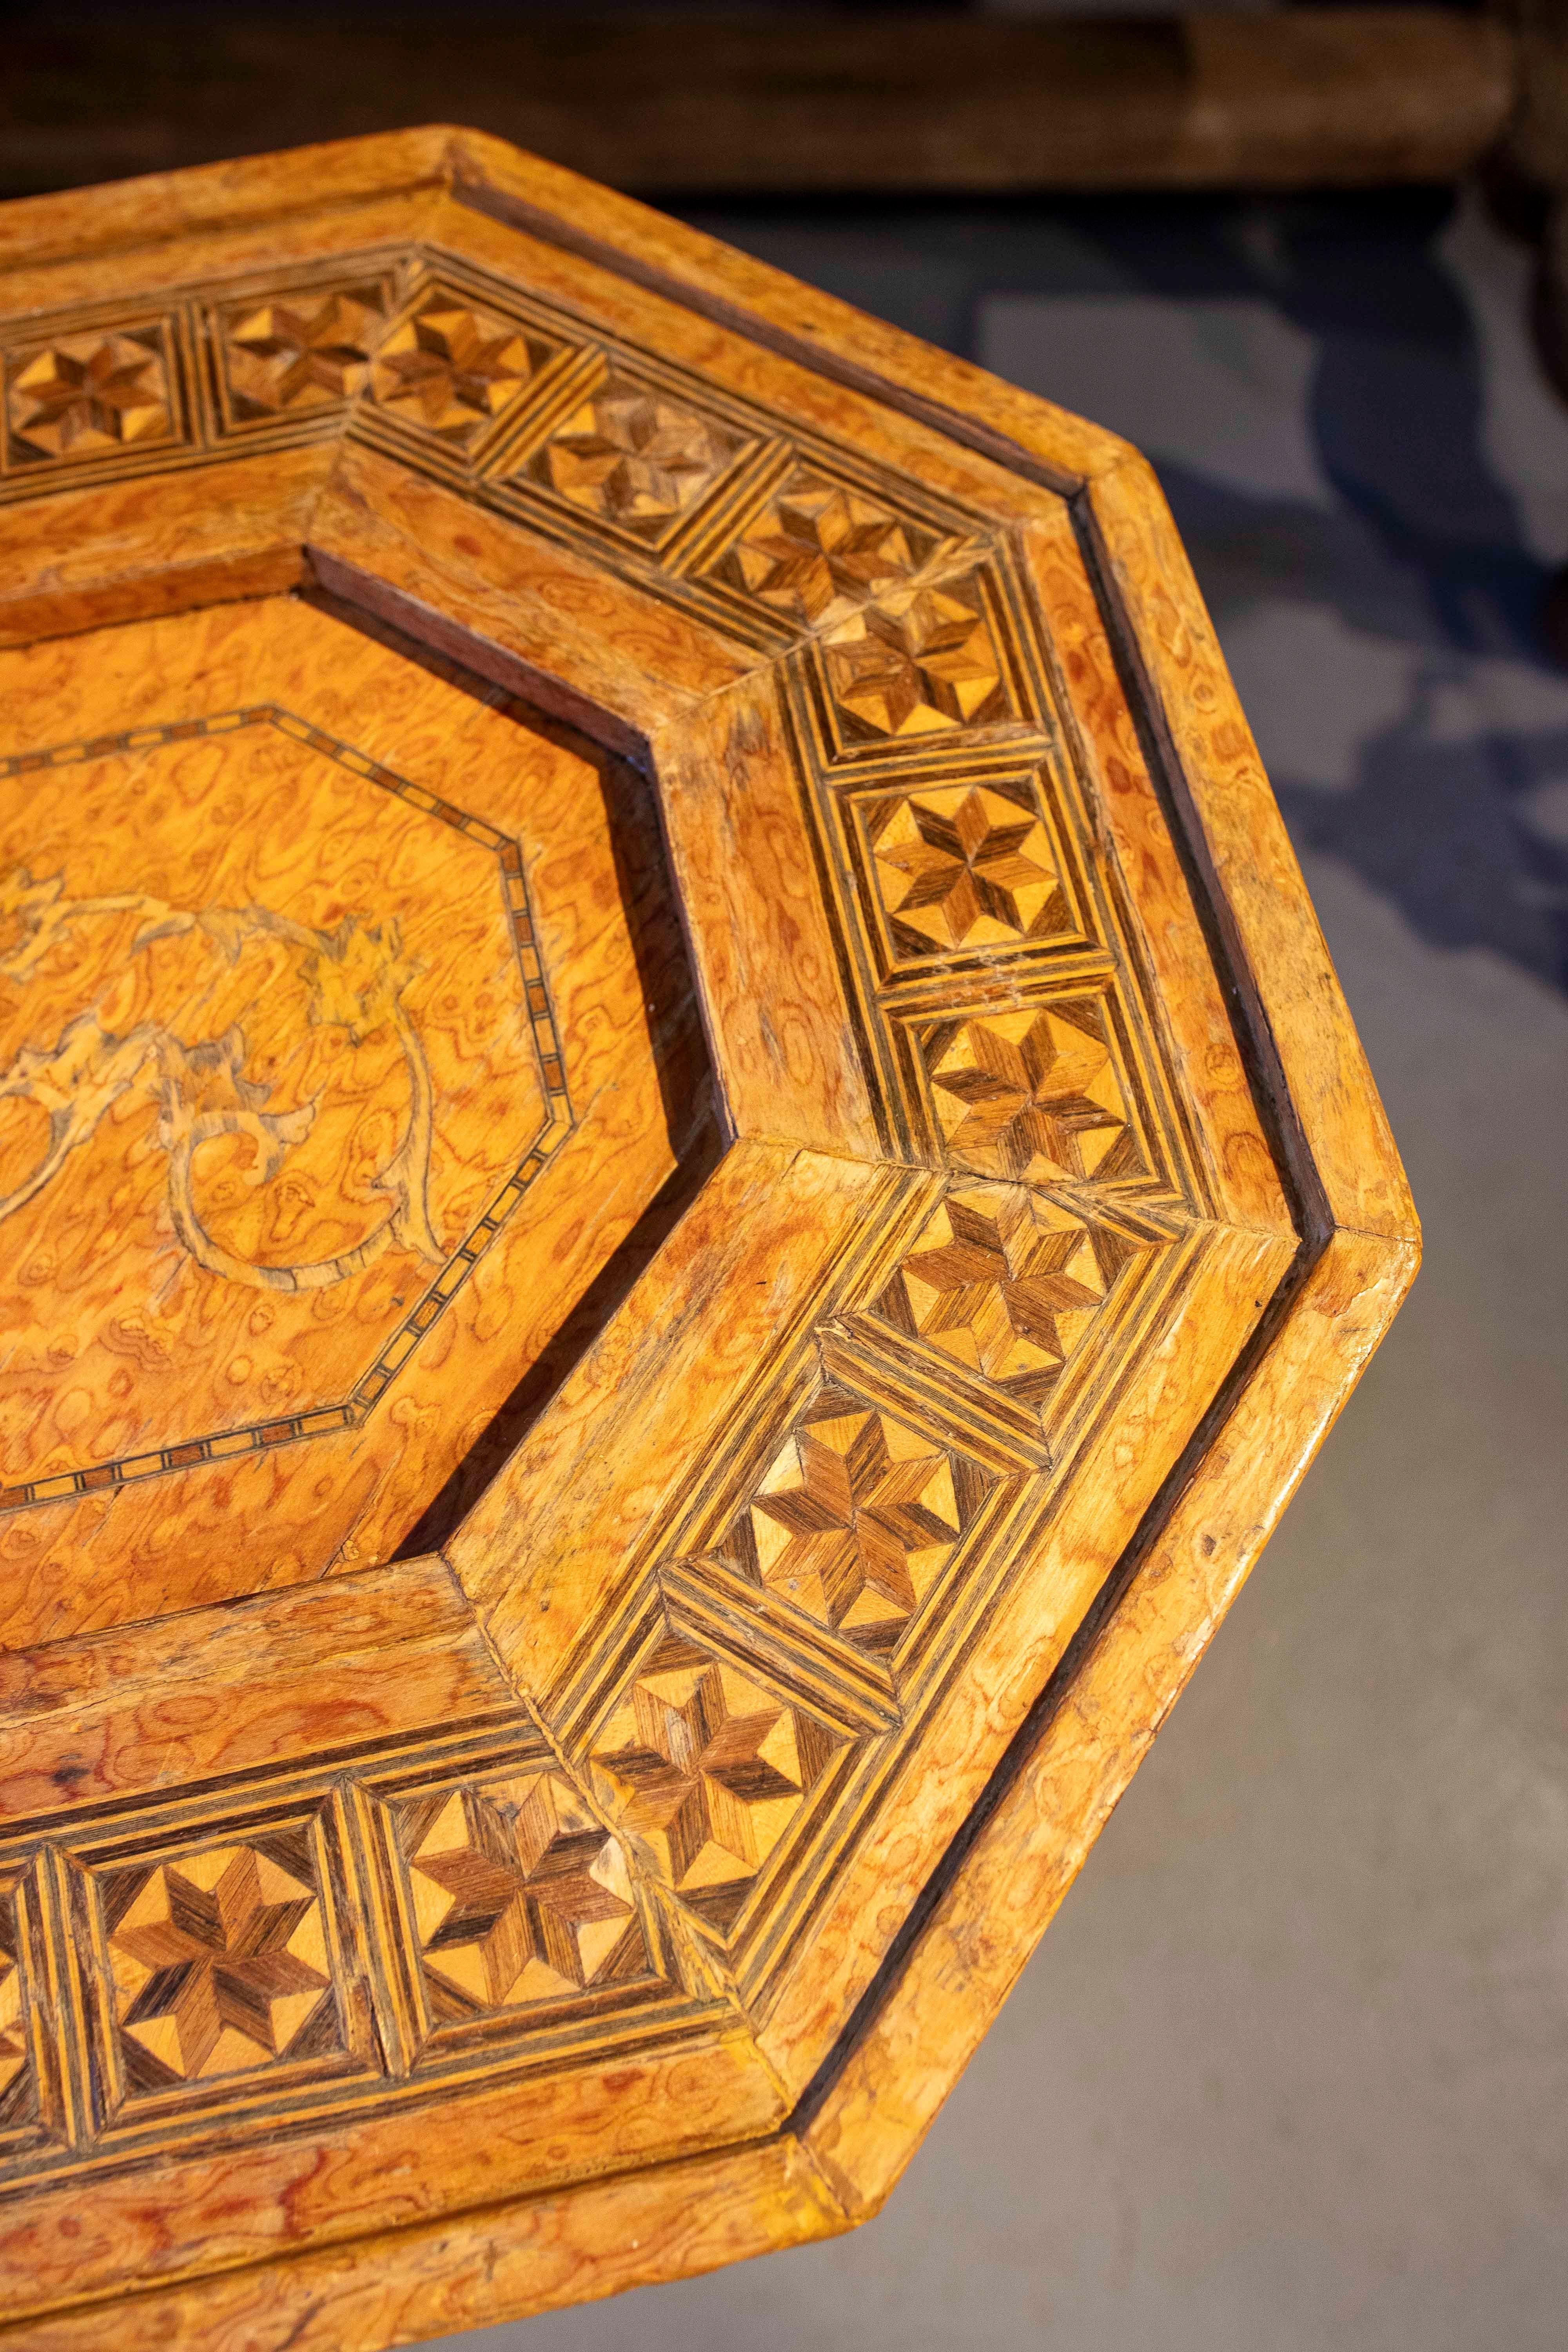  1980s Octagonal Wooden Table with Inlays 3